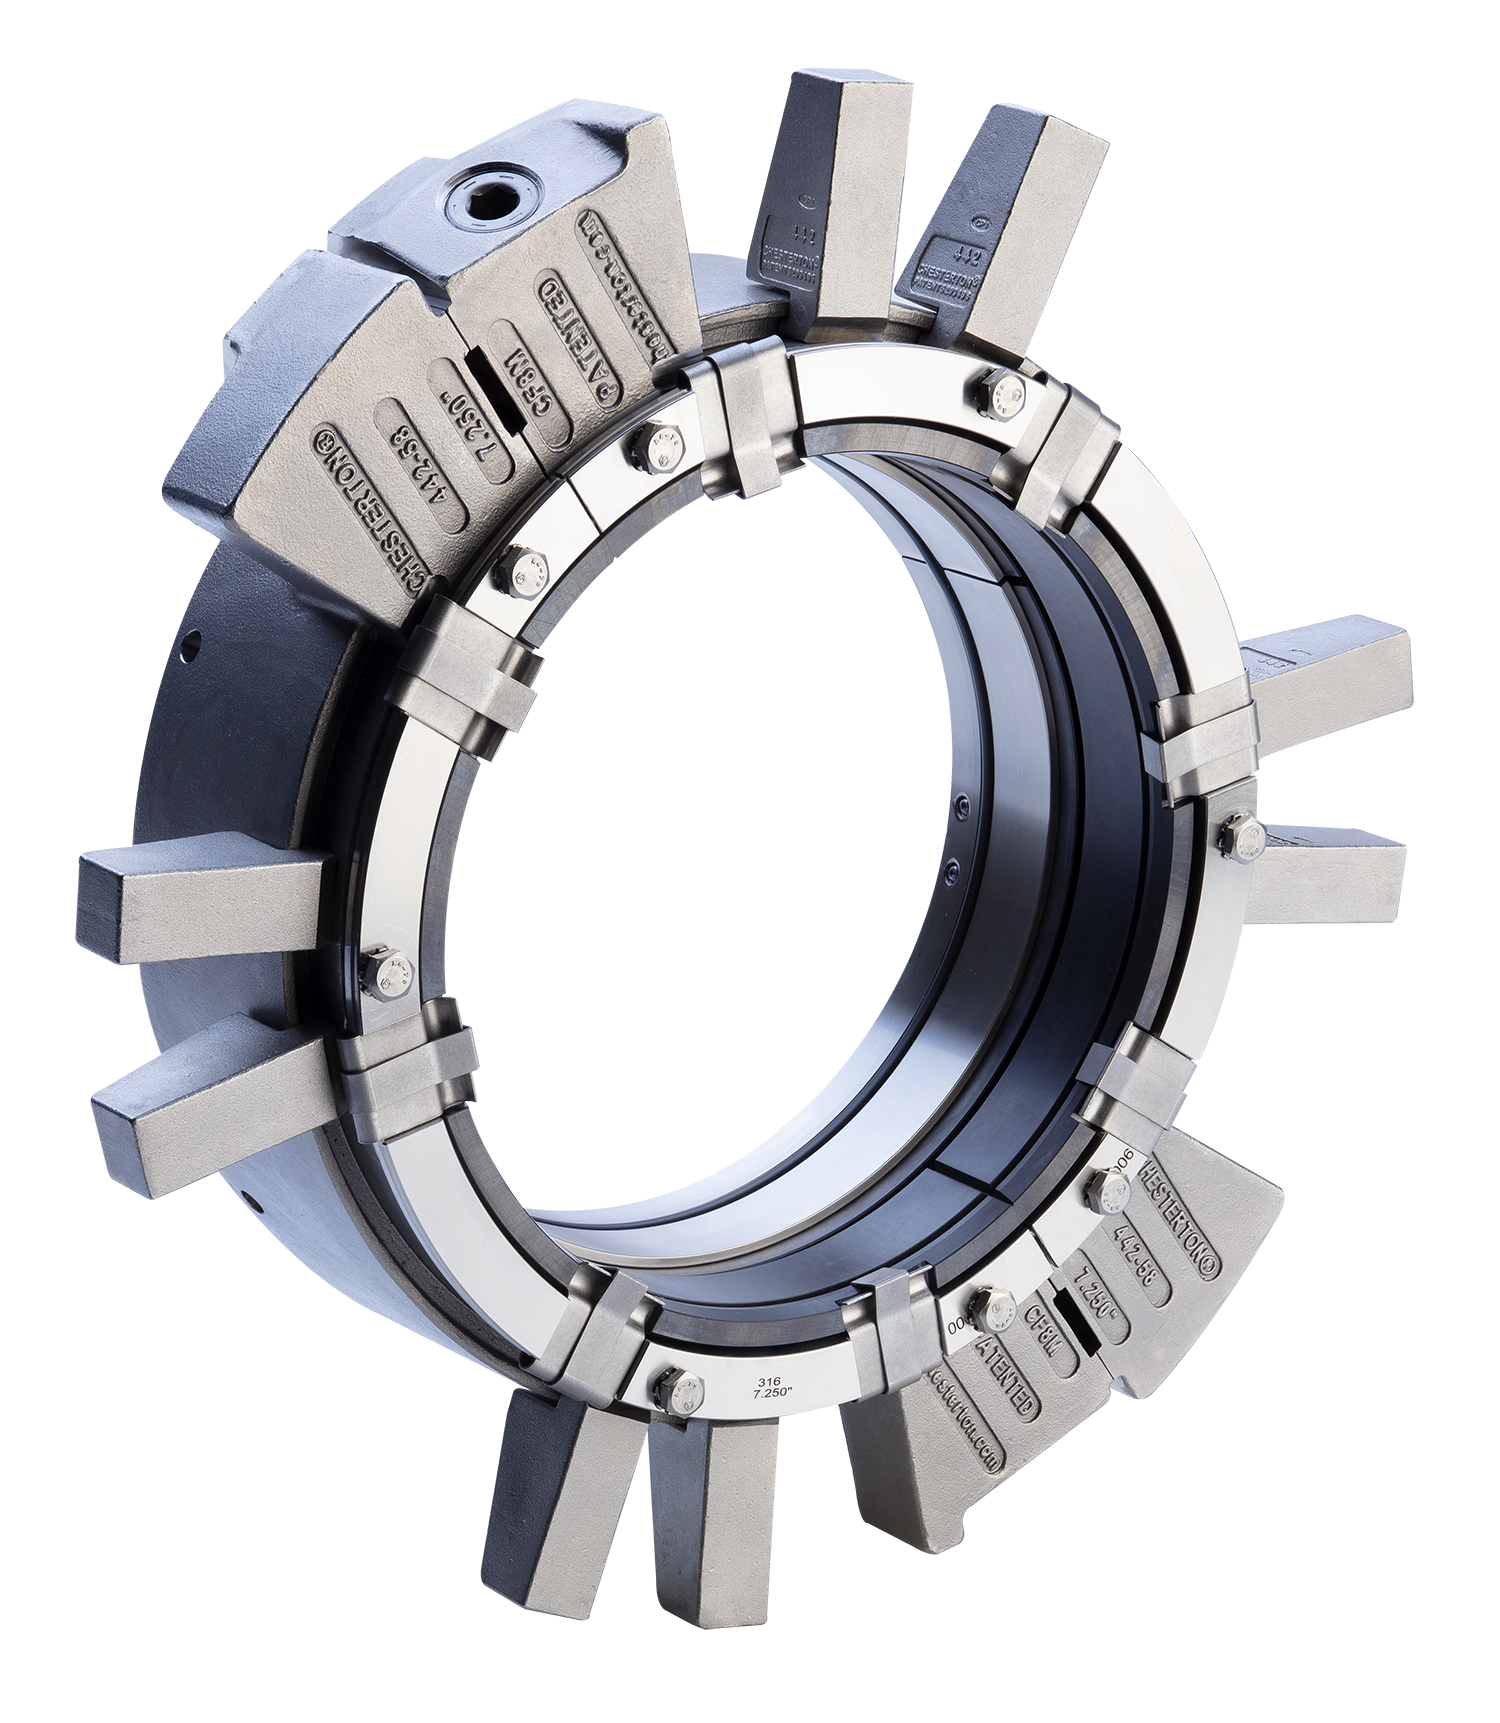 The new 442C XL fits rotating equipment with shafts ranging from 5.00 in (125 mm) up to 7.75 in (195 mm).